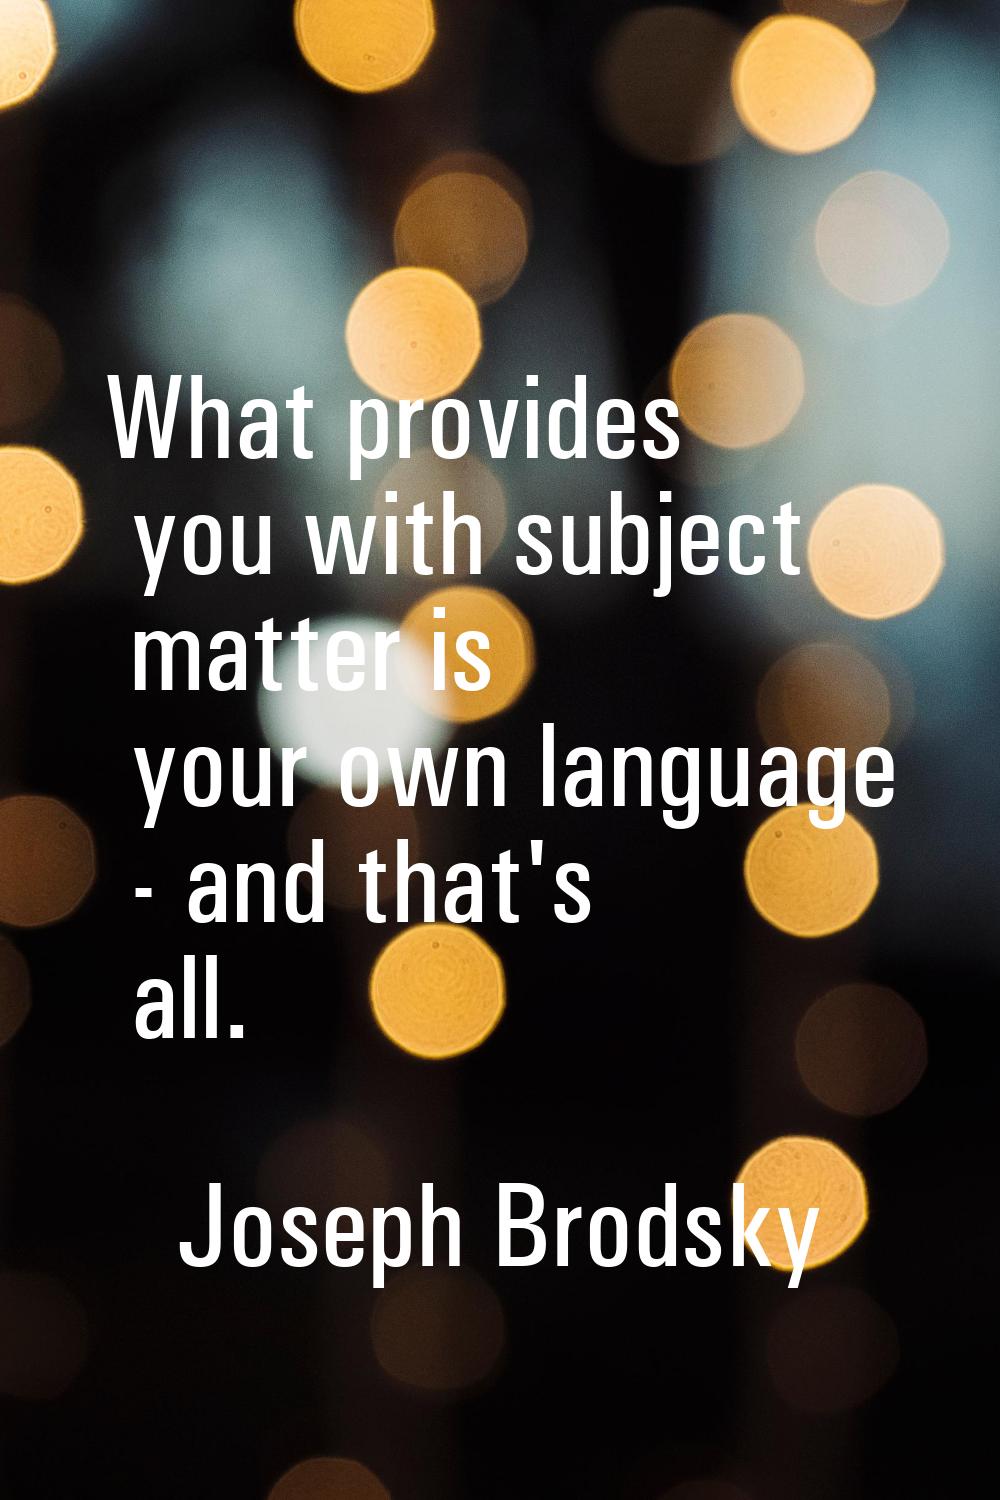 What provides you with subject matter is your own language - and that's all.